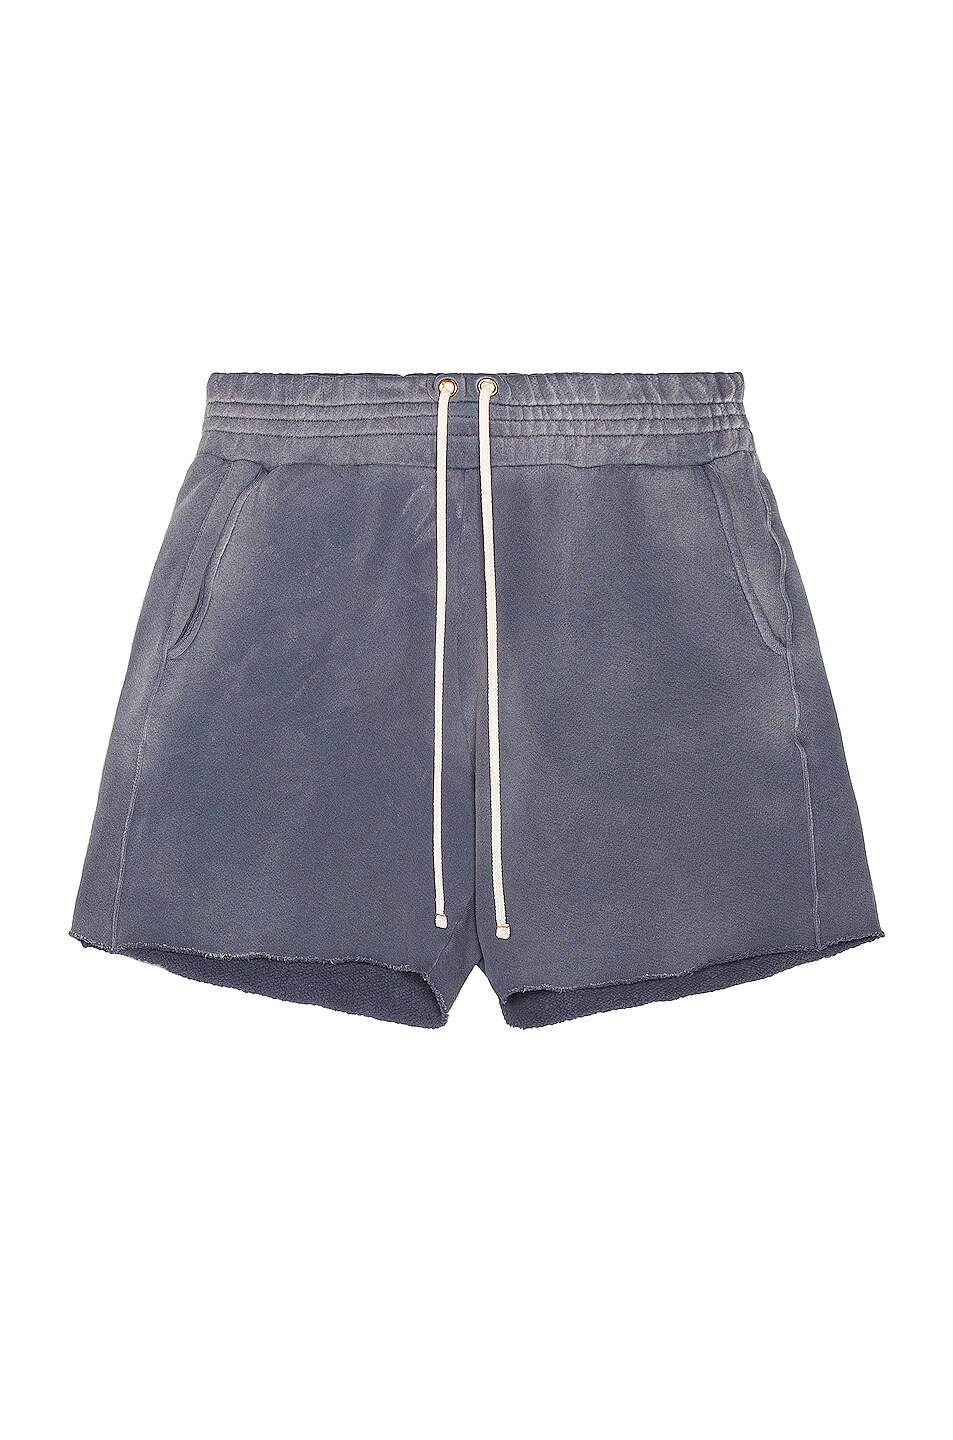 Image 1 of Les Tien Yacht Short in Navy Iced Wash